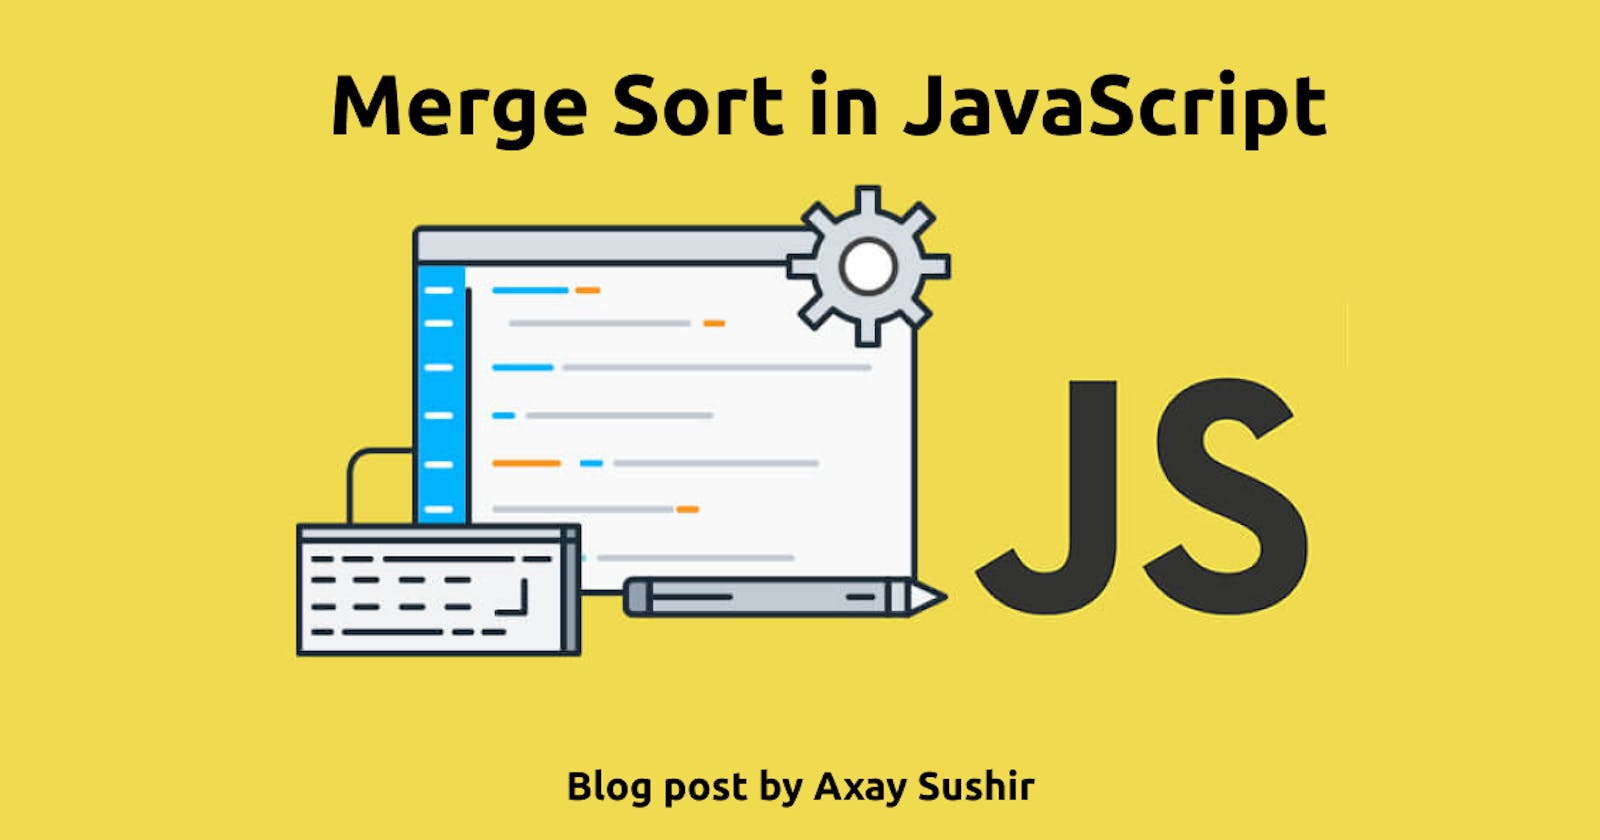 How to implement Merge Sort in JavaScript?